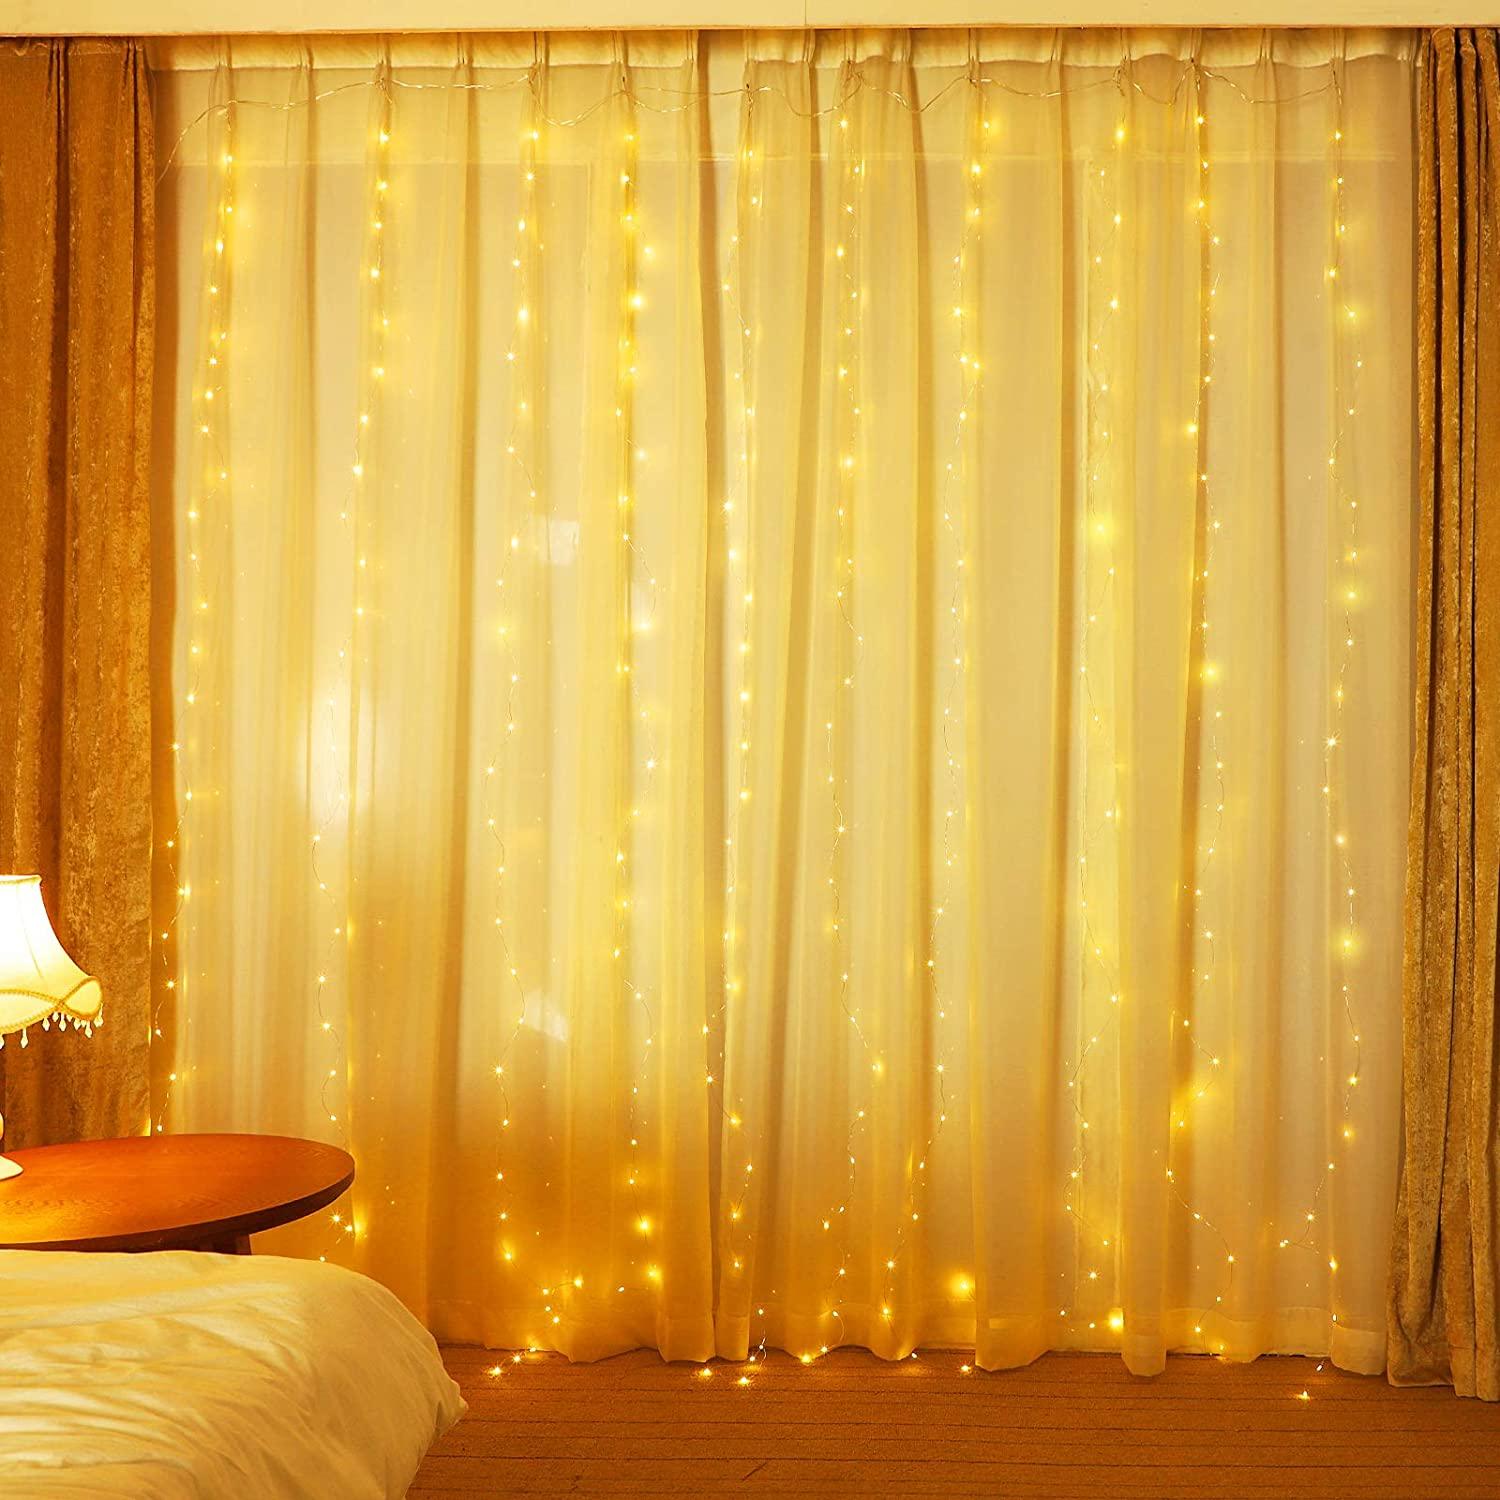 Window Curtain String Lights for Garden Wall Decorations - If you say i do